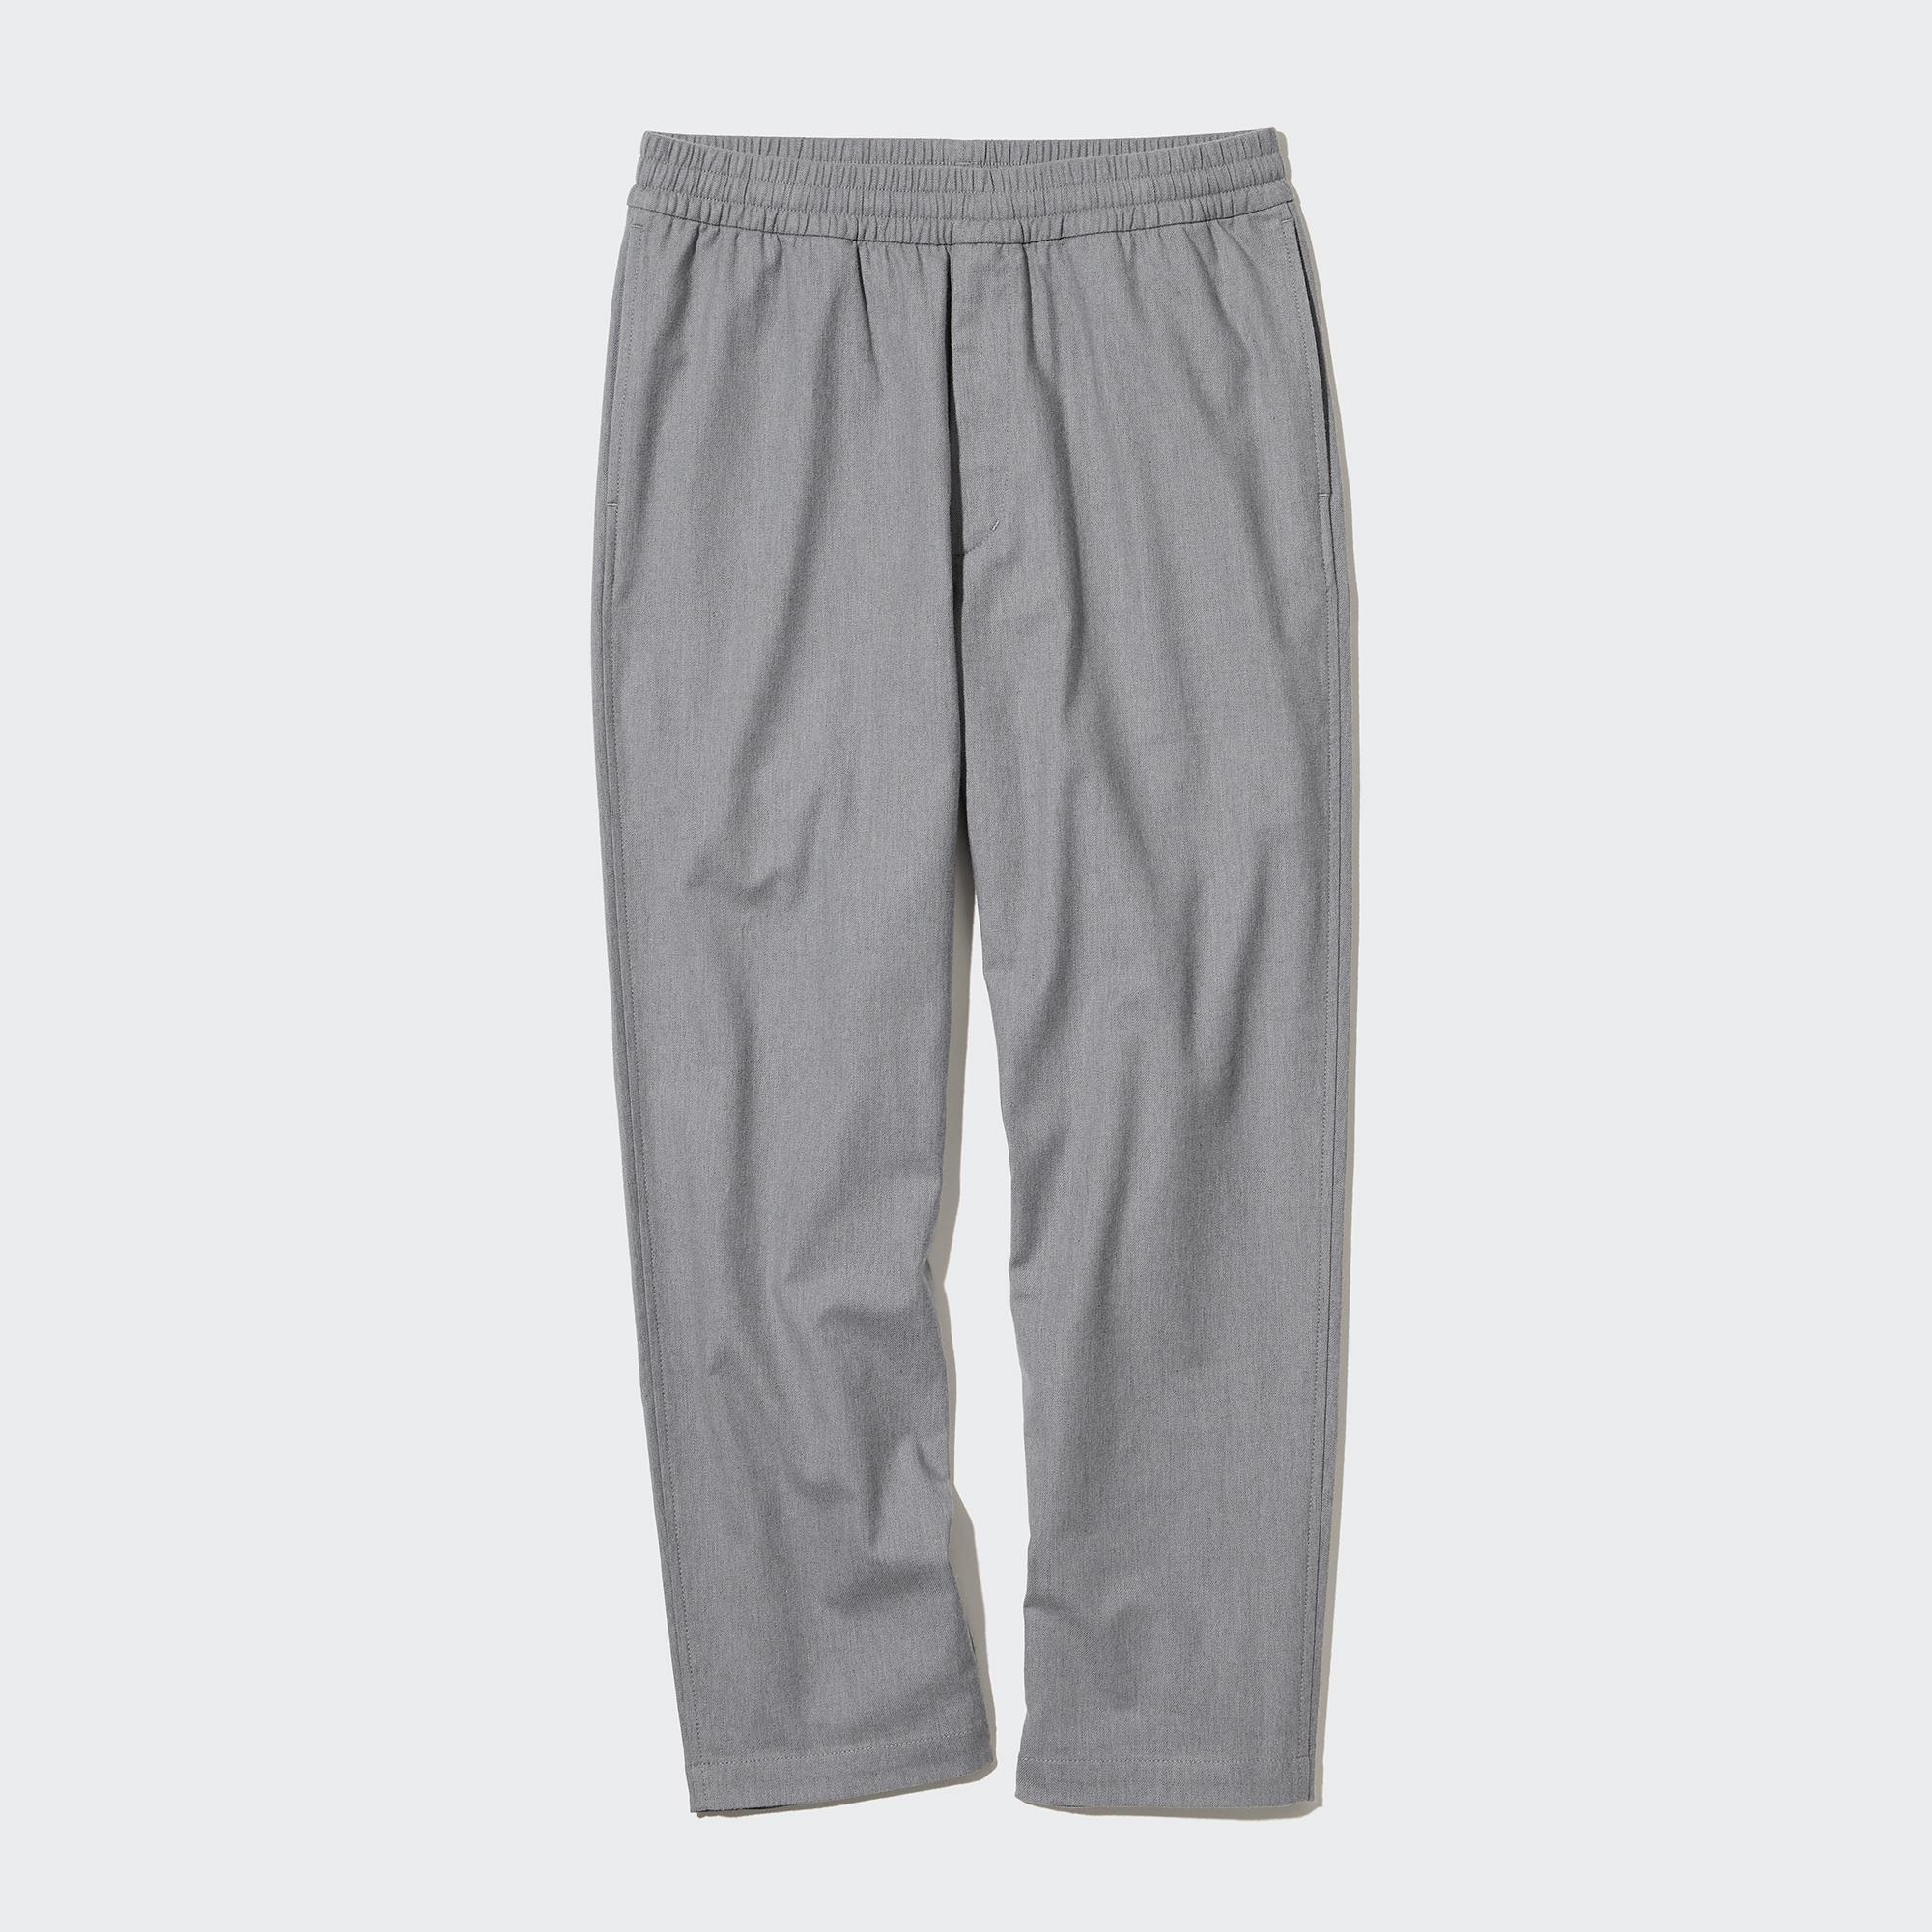 UNIQLO Flannel Easy Ankle Pants | StyleHint